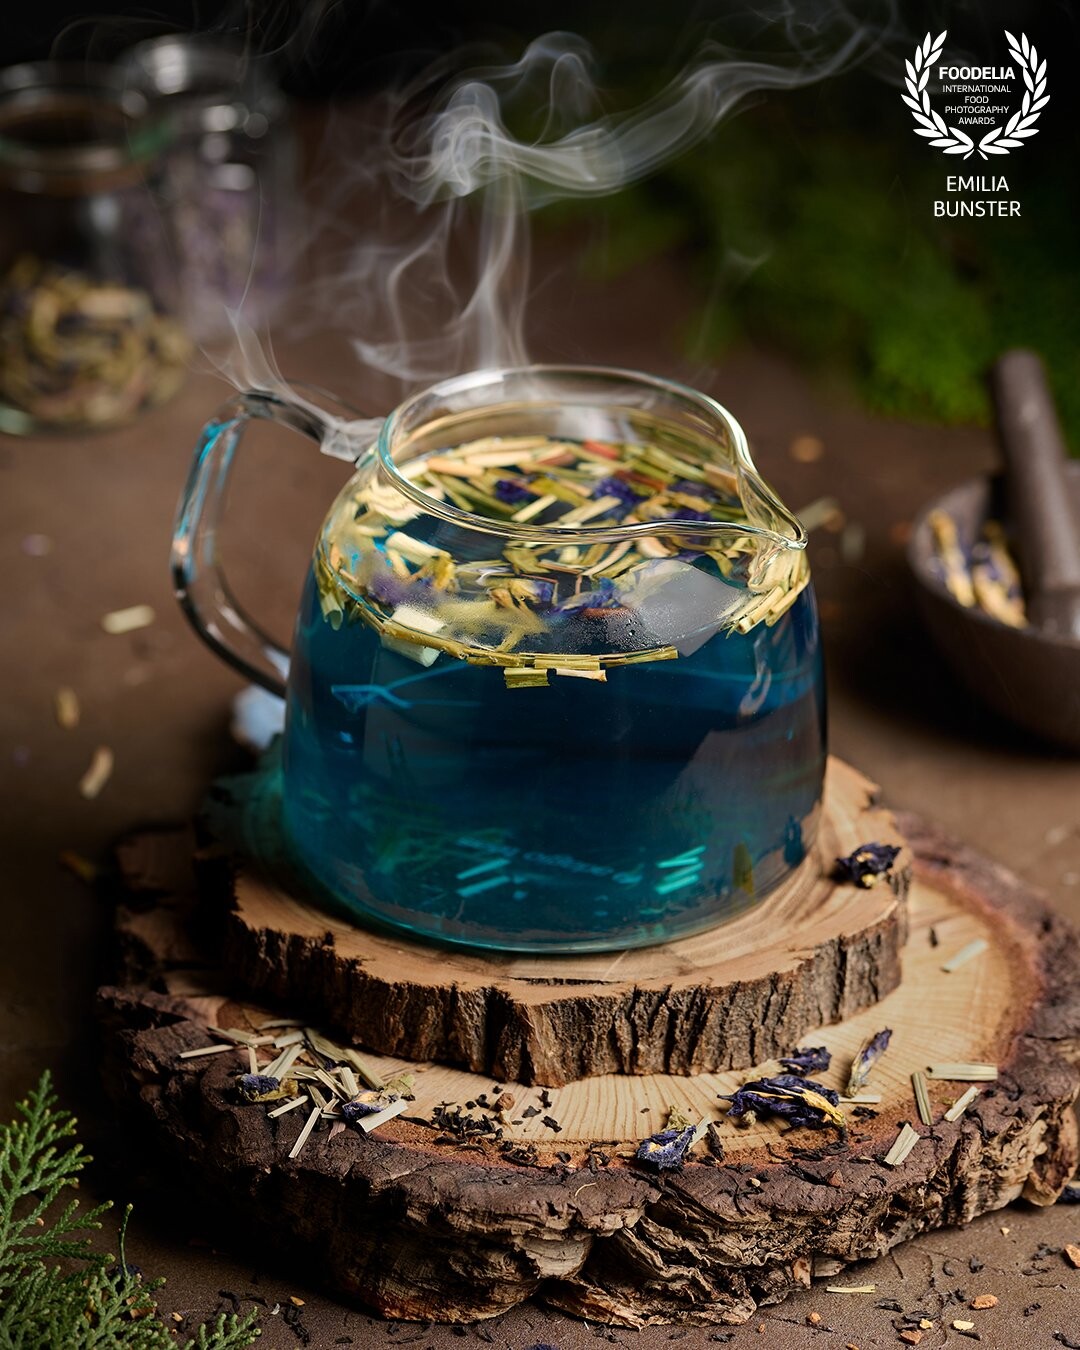 Personal project where I worked with a blue tea, natural elements and steam to try to achieve something mystical but cozy. I must say that this tea from @adagioteaschile is delicious.